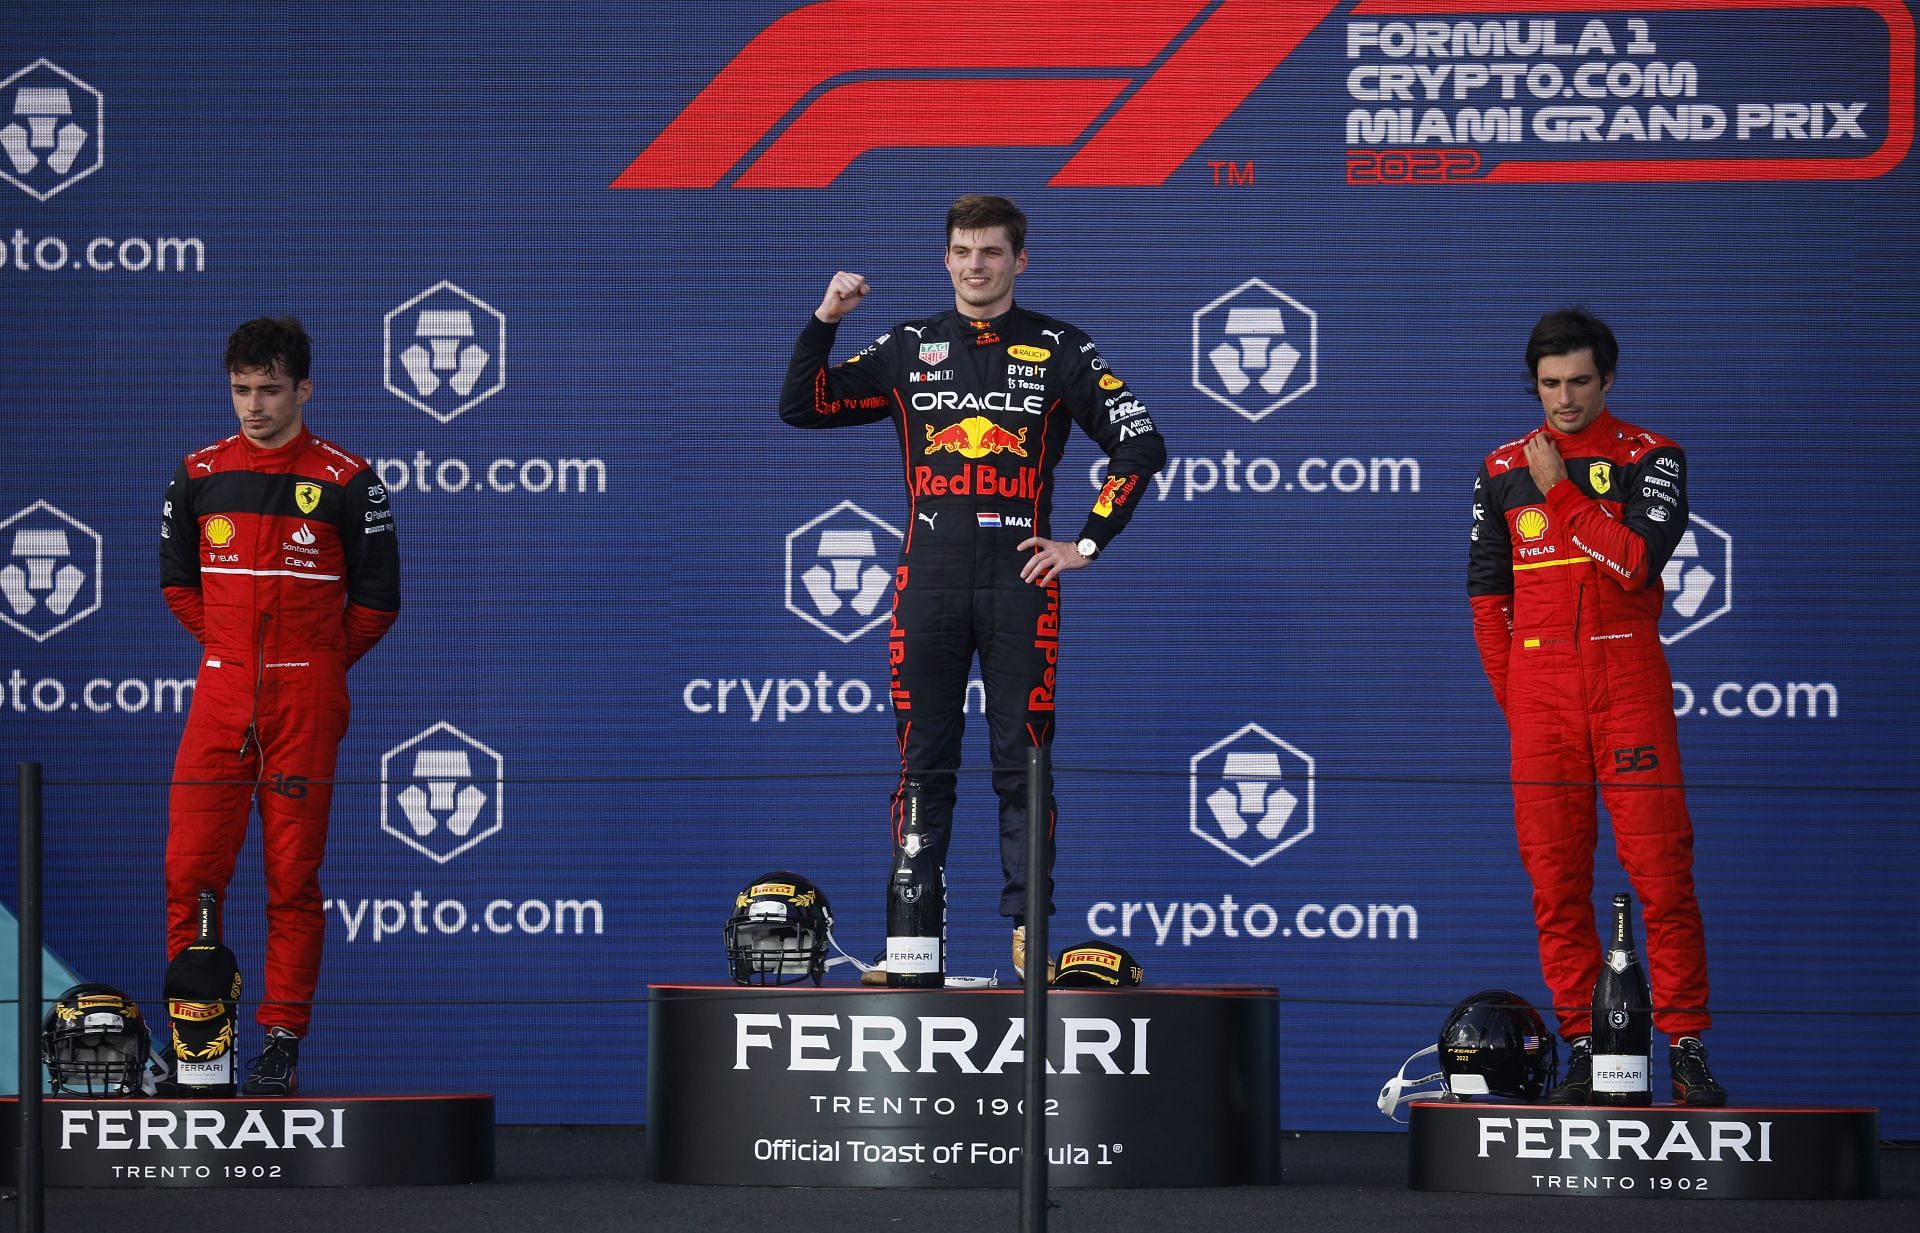 Race winner Max Verstappen (center), second-placed Charles Leclerc (left), and third-placed Carlos Sainz (right) celebrate on the podium during the F1 Grand Prix of Miami at the Miami International Autodrome on May 08, 2022, in Miami, Florida (Photo by Chris Graythen/Getty Images)